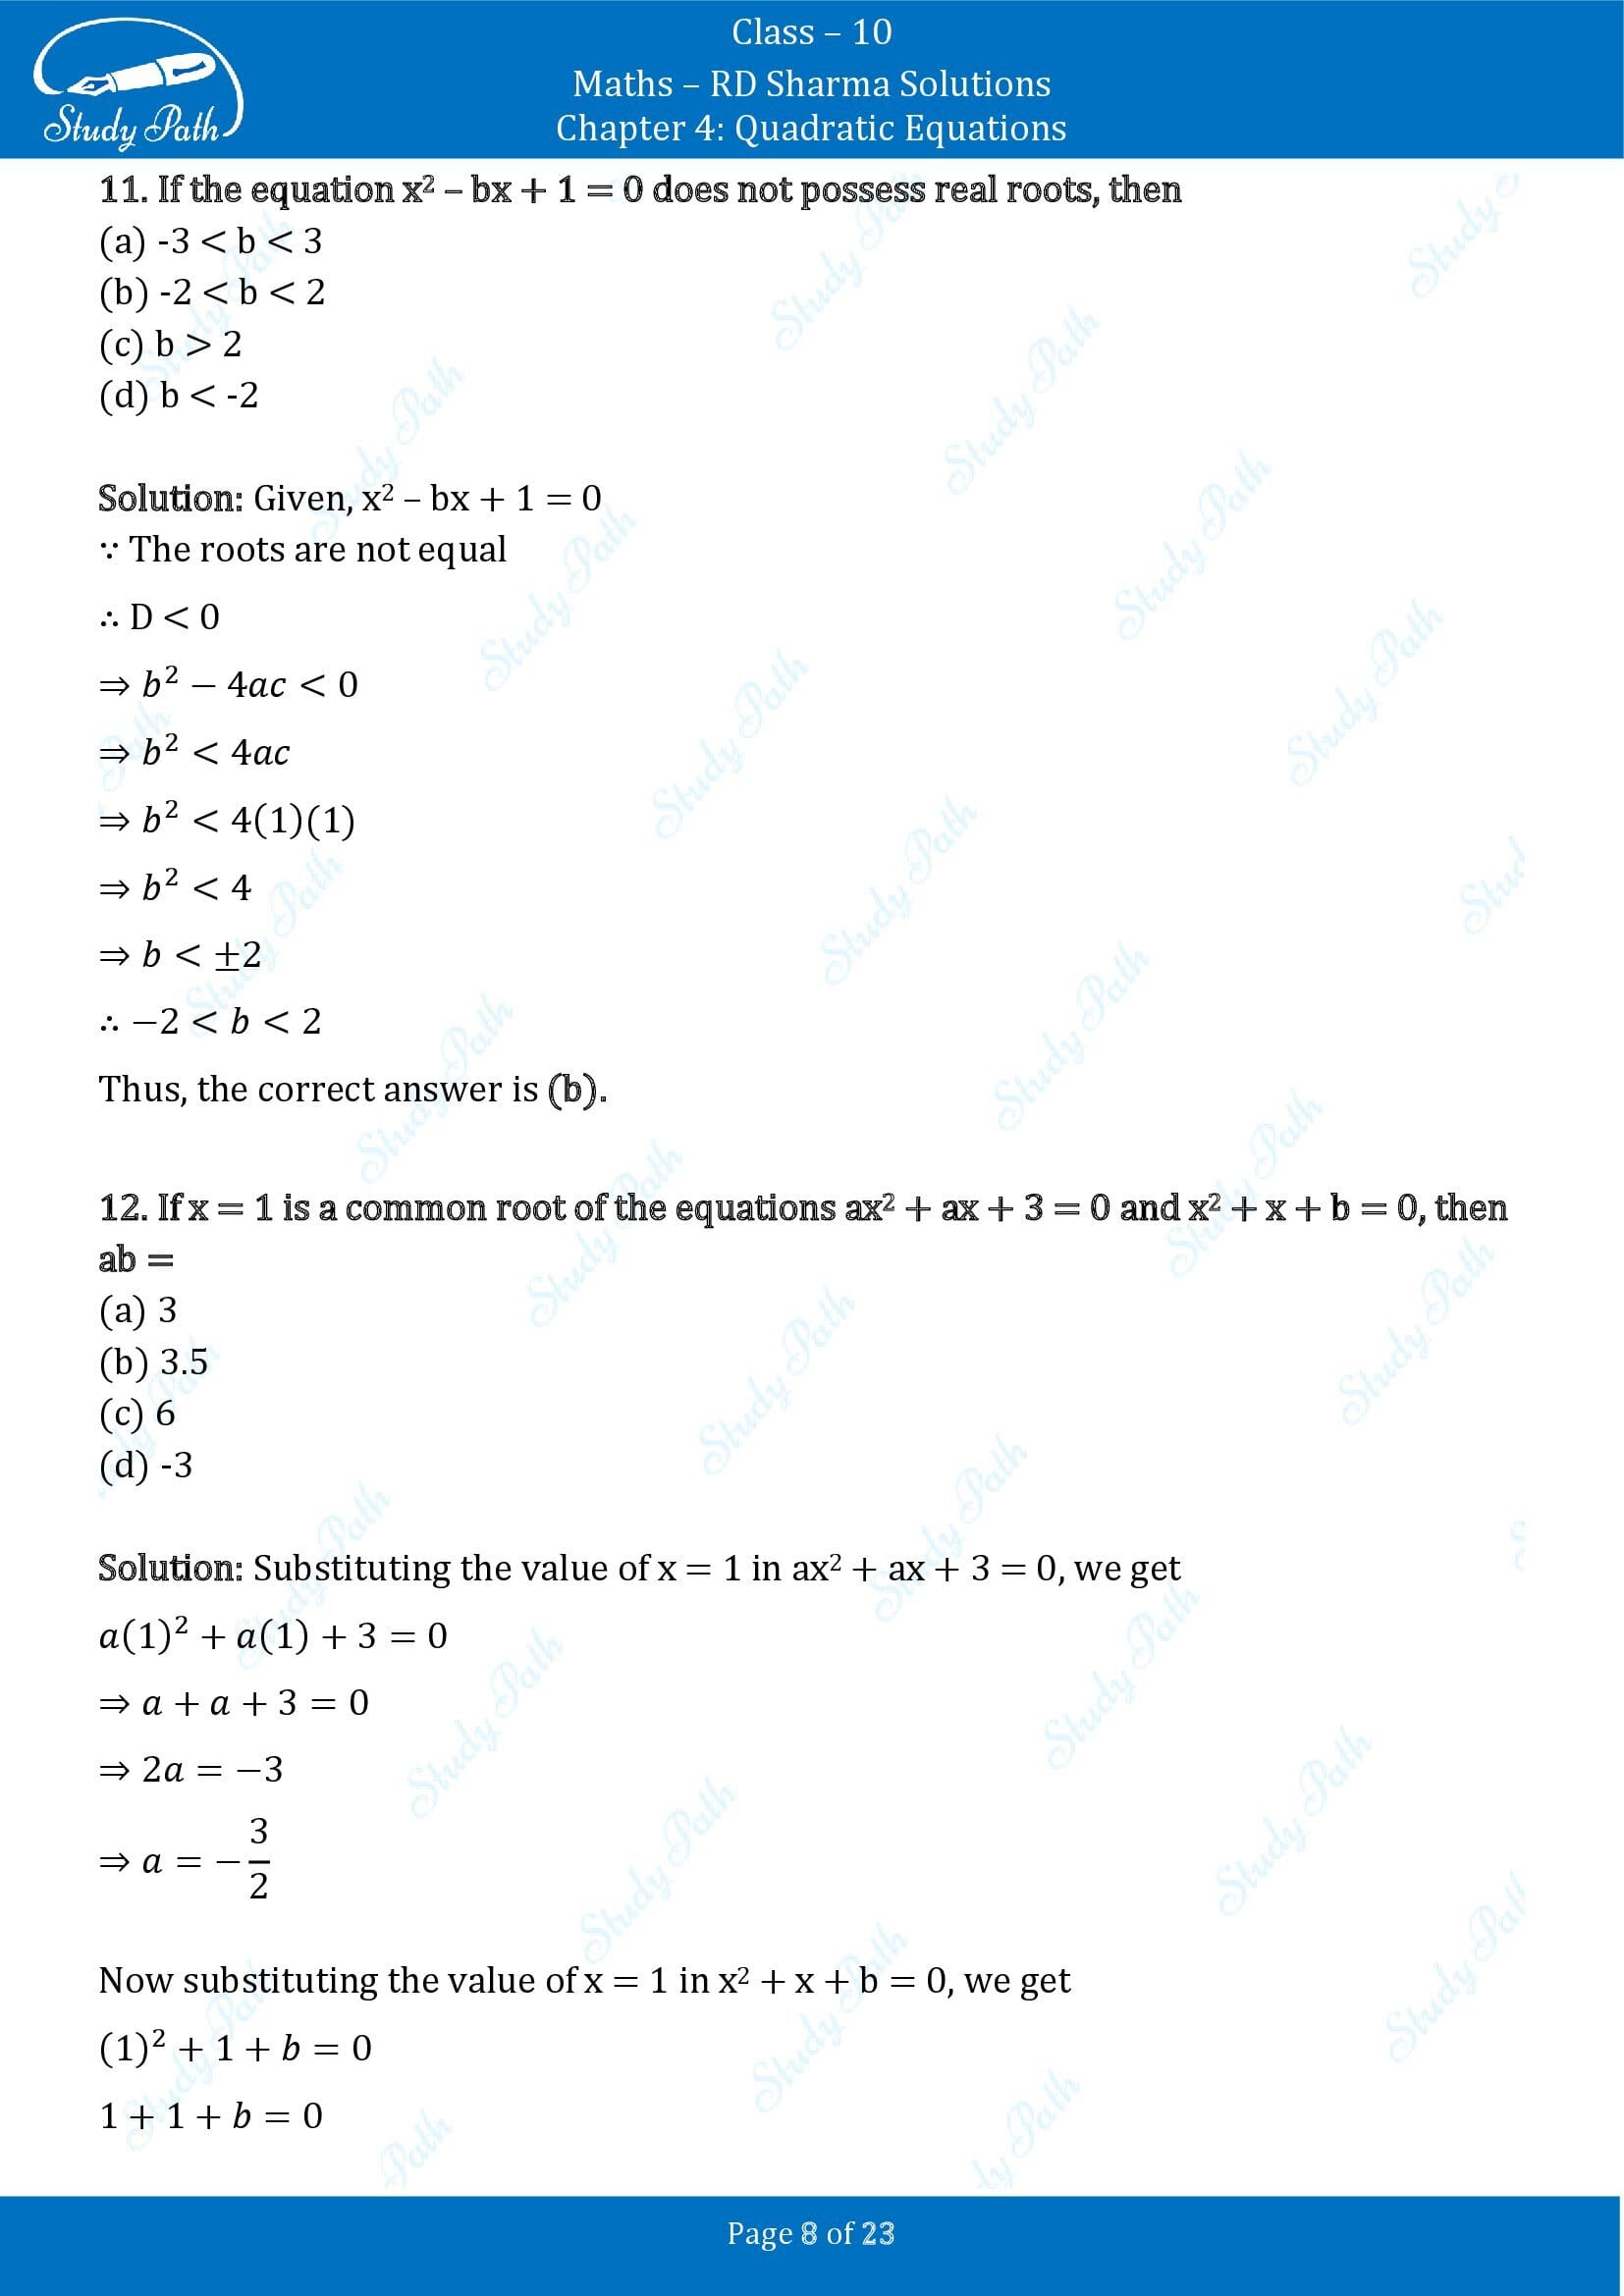 RD Sharma Solutions Class 10 Chapter 4 Quadratic Equations Multiple Choice Questions MCQs 00008